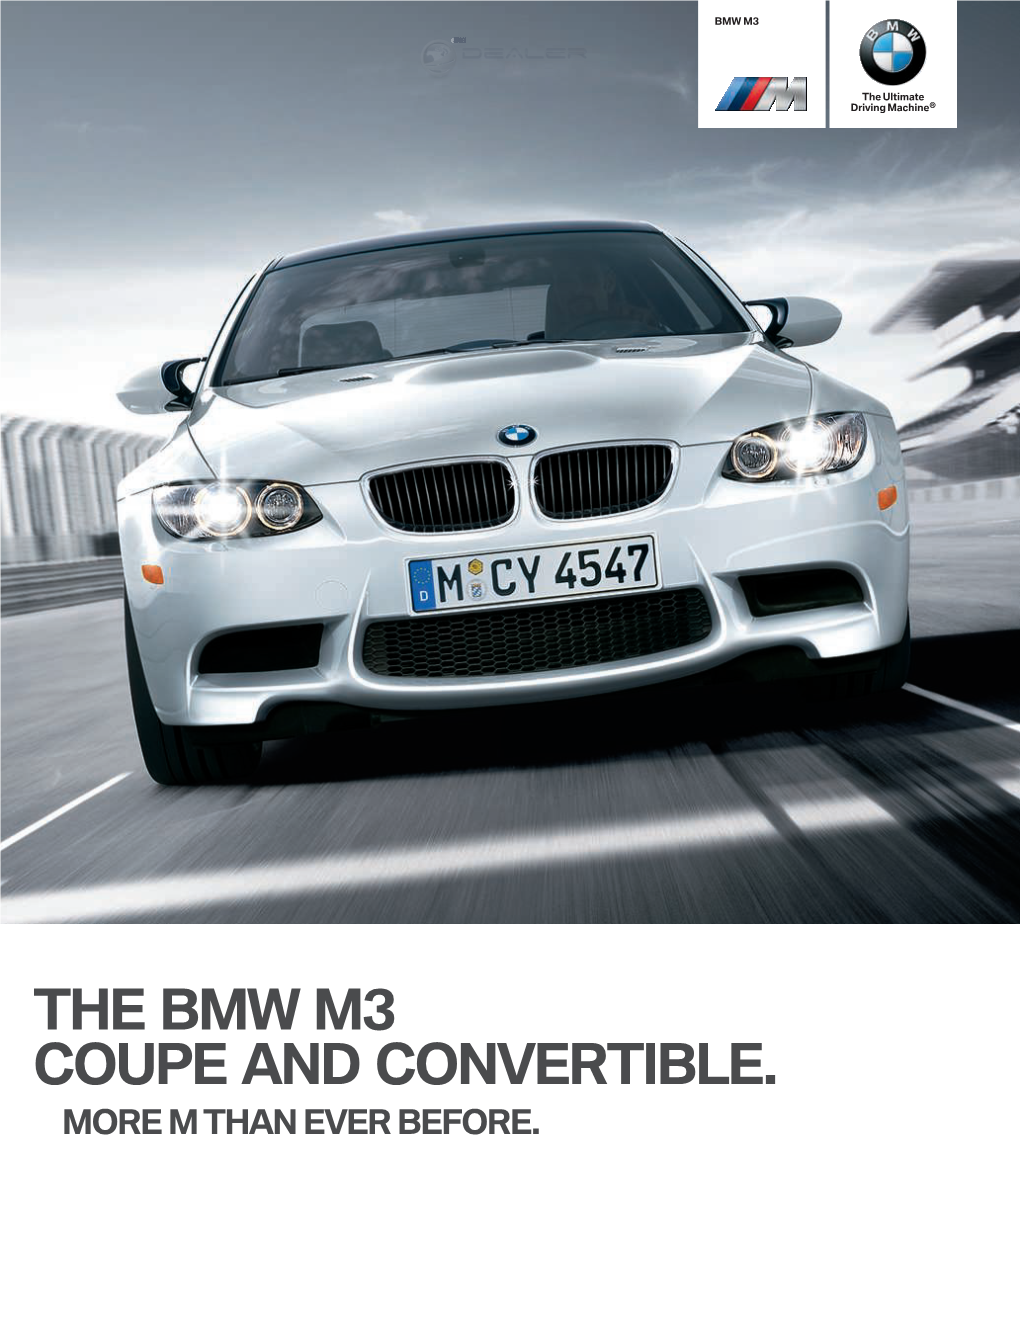 The Bmw M3 Coupe and Convertible. More M Than Ever Before